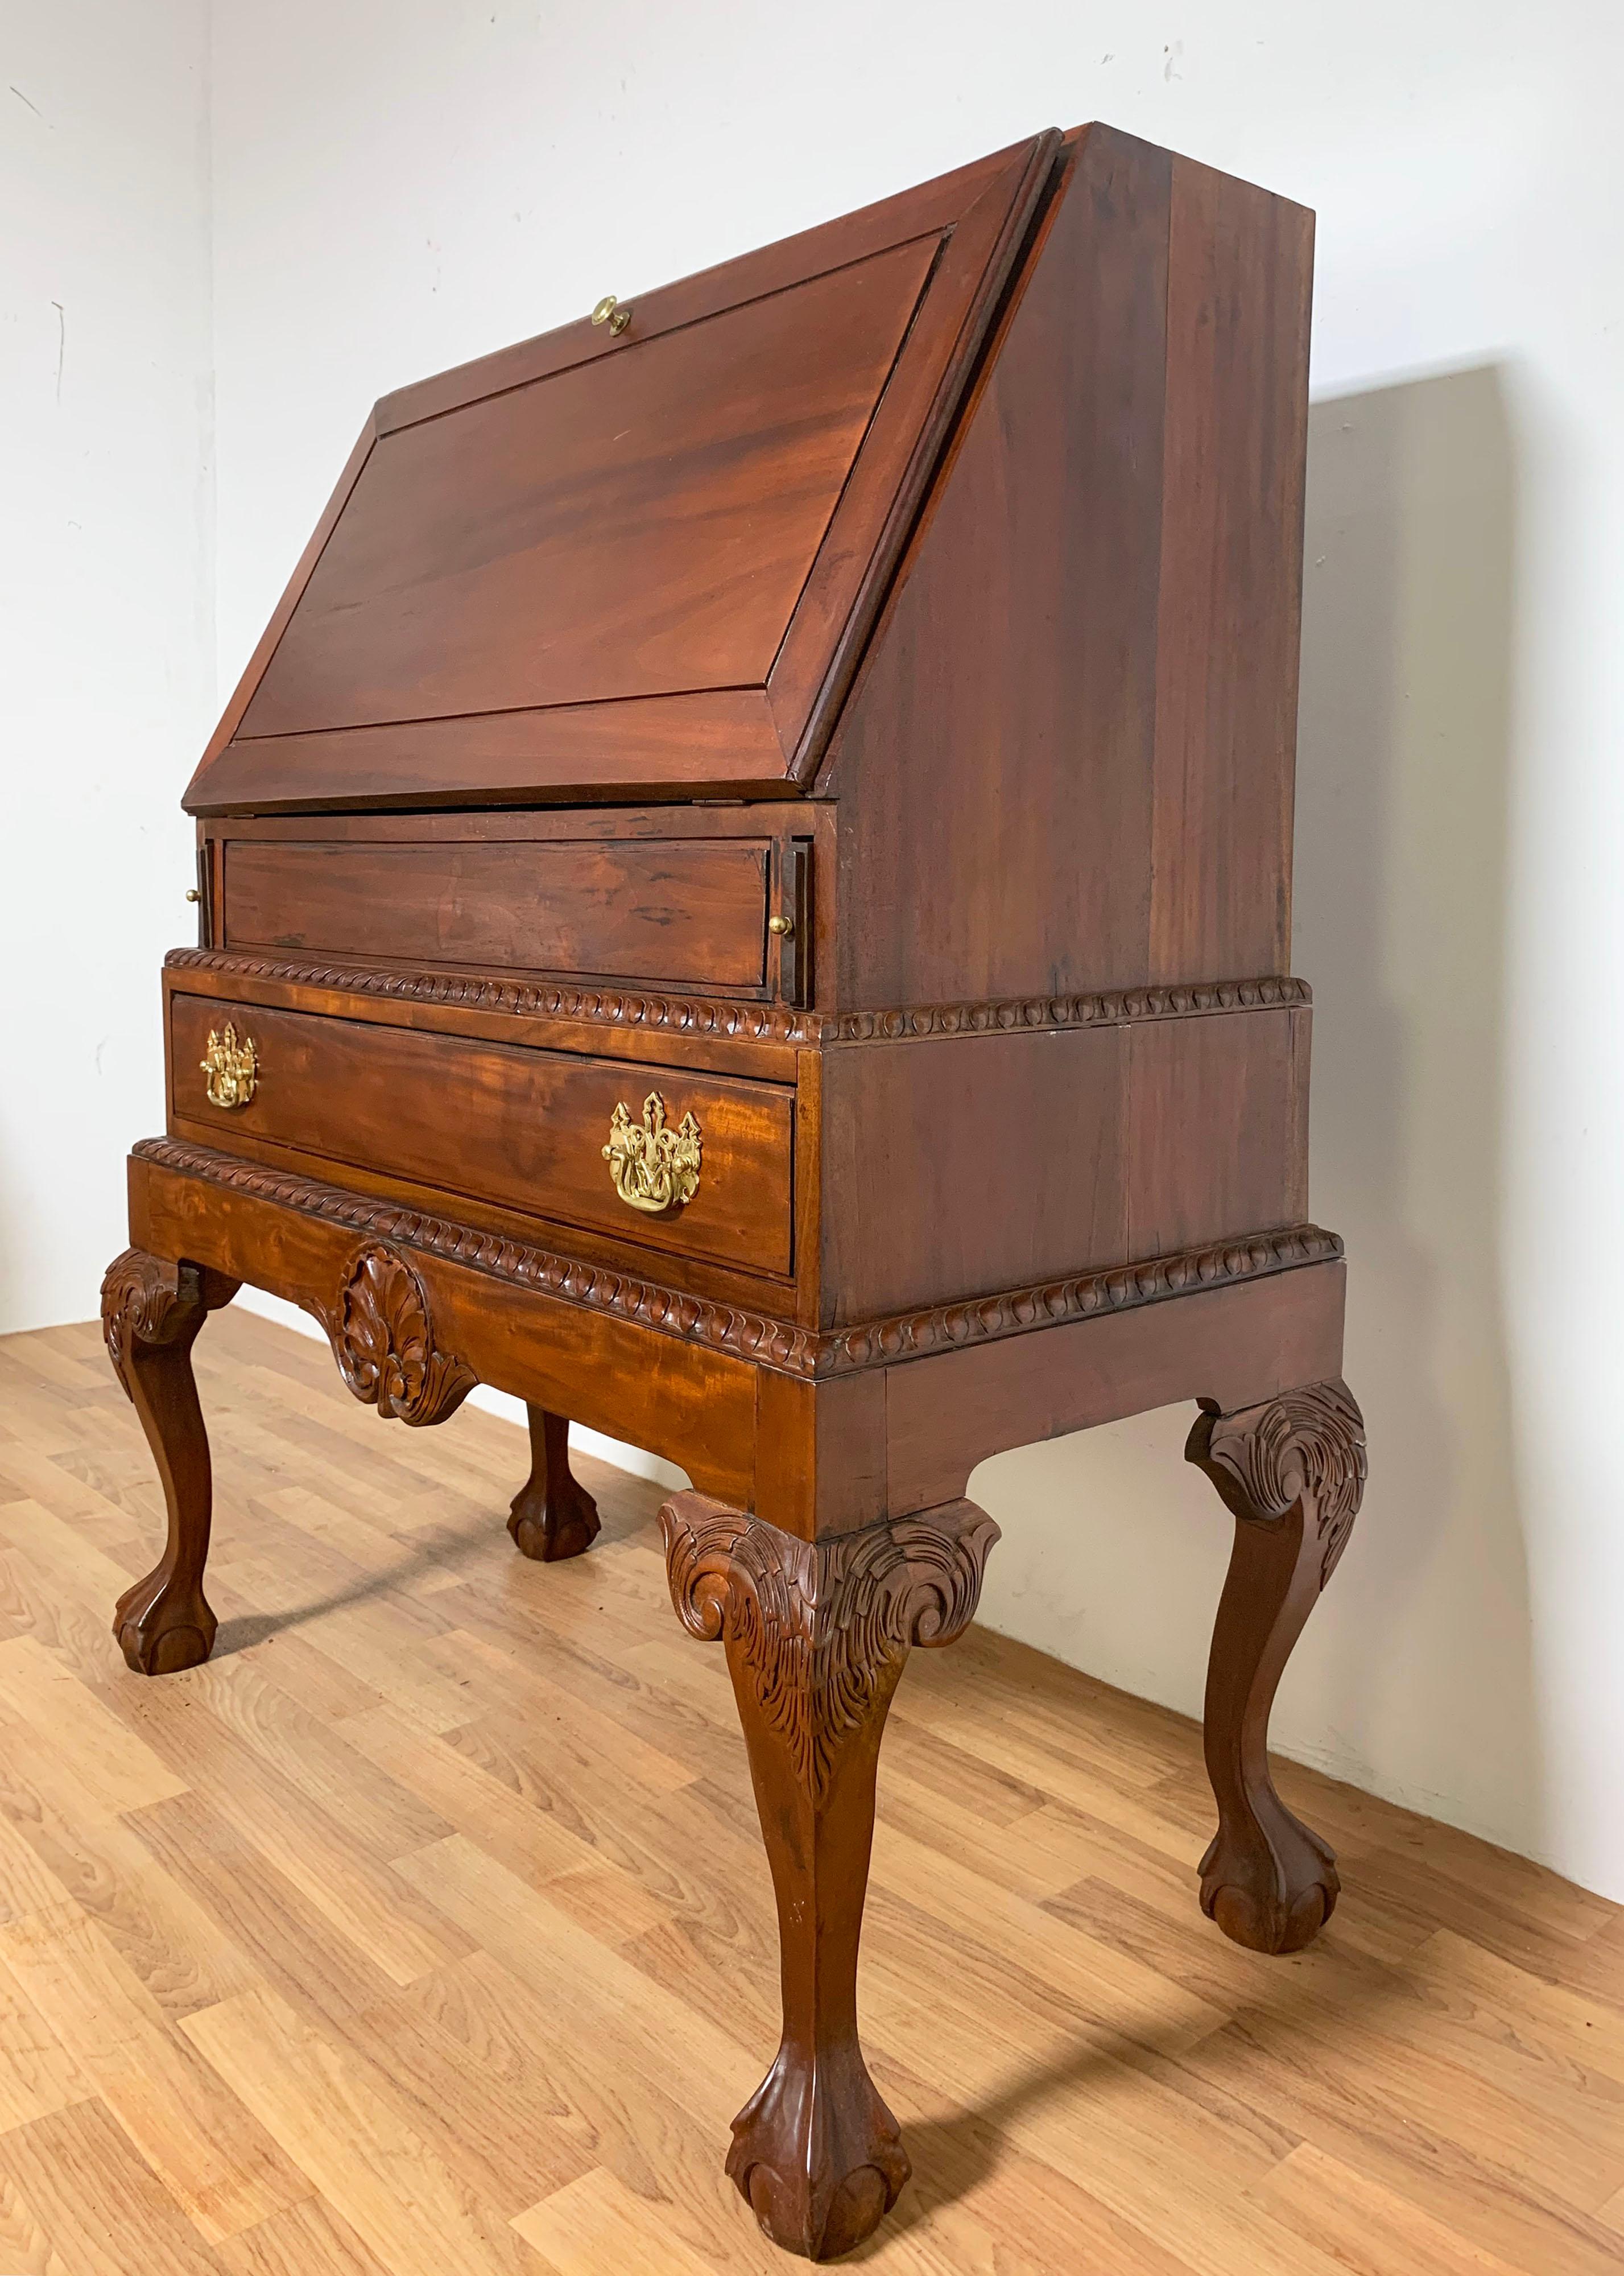 Custom hand built Queen Anne style drop front desk on frame with carved cabriole legs, gadrooned edges and shell carved apron. In solid mahogany boards with brass hardware, circa mid 20th century.

Measures: 41.5